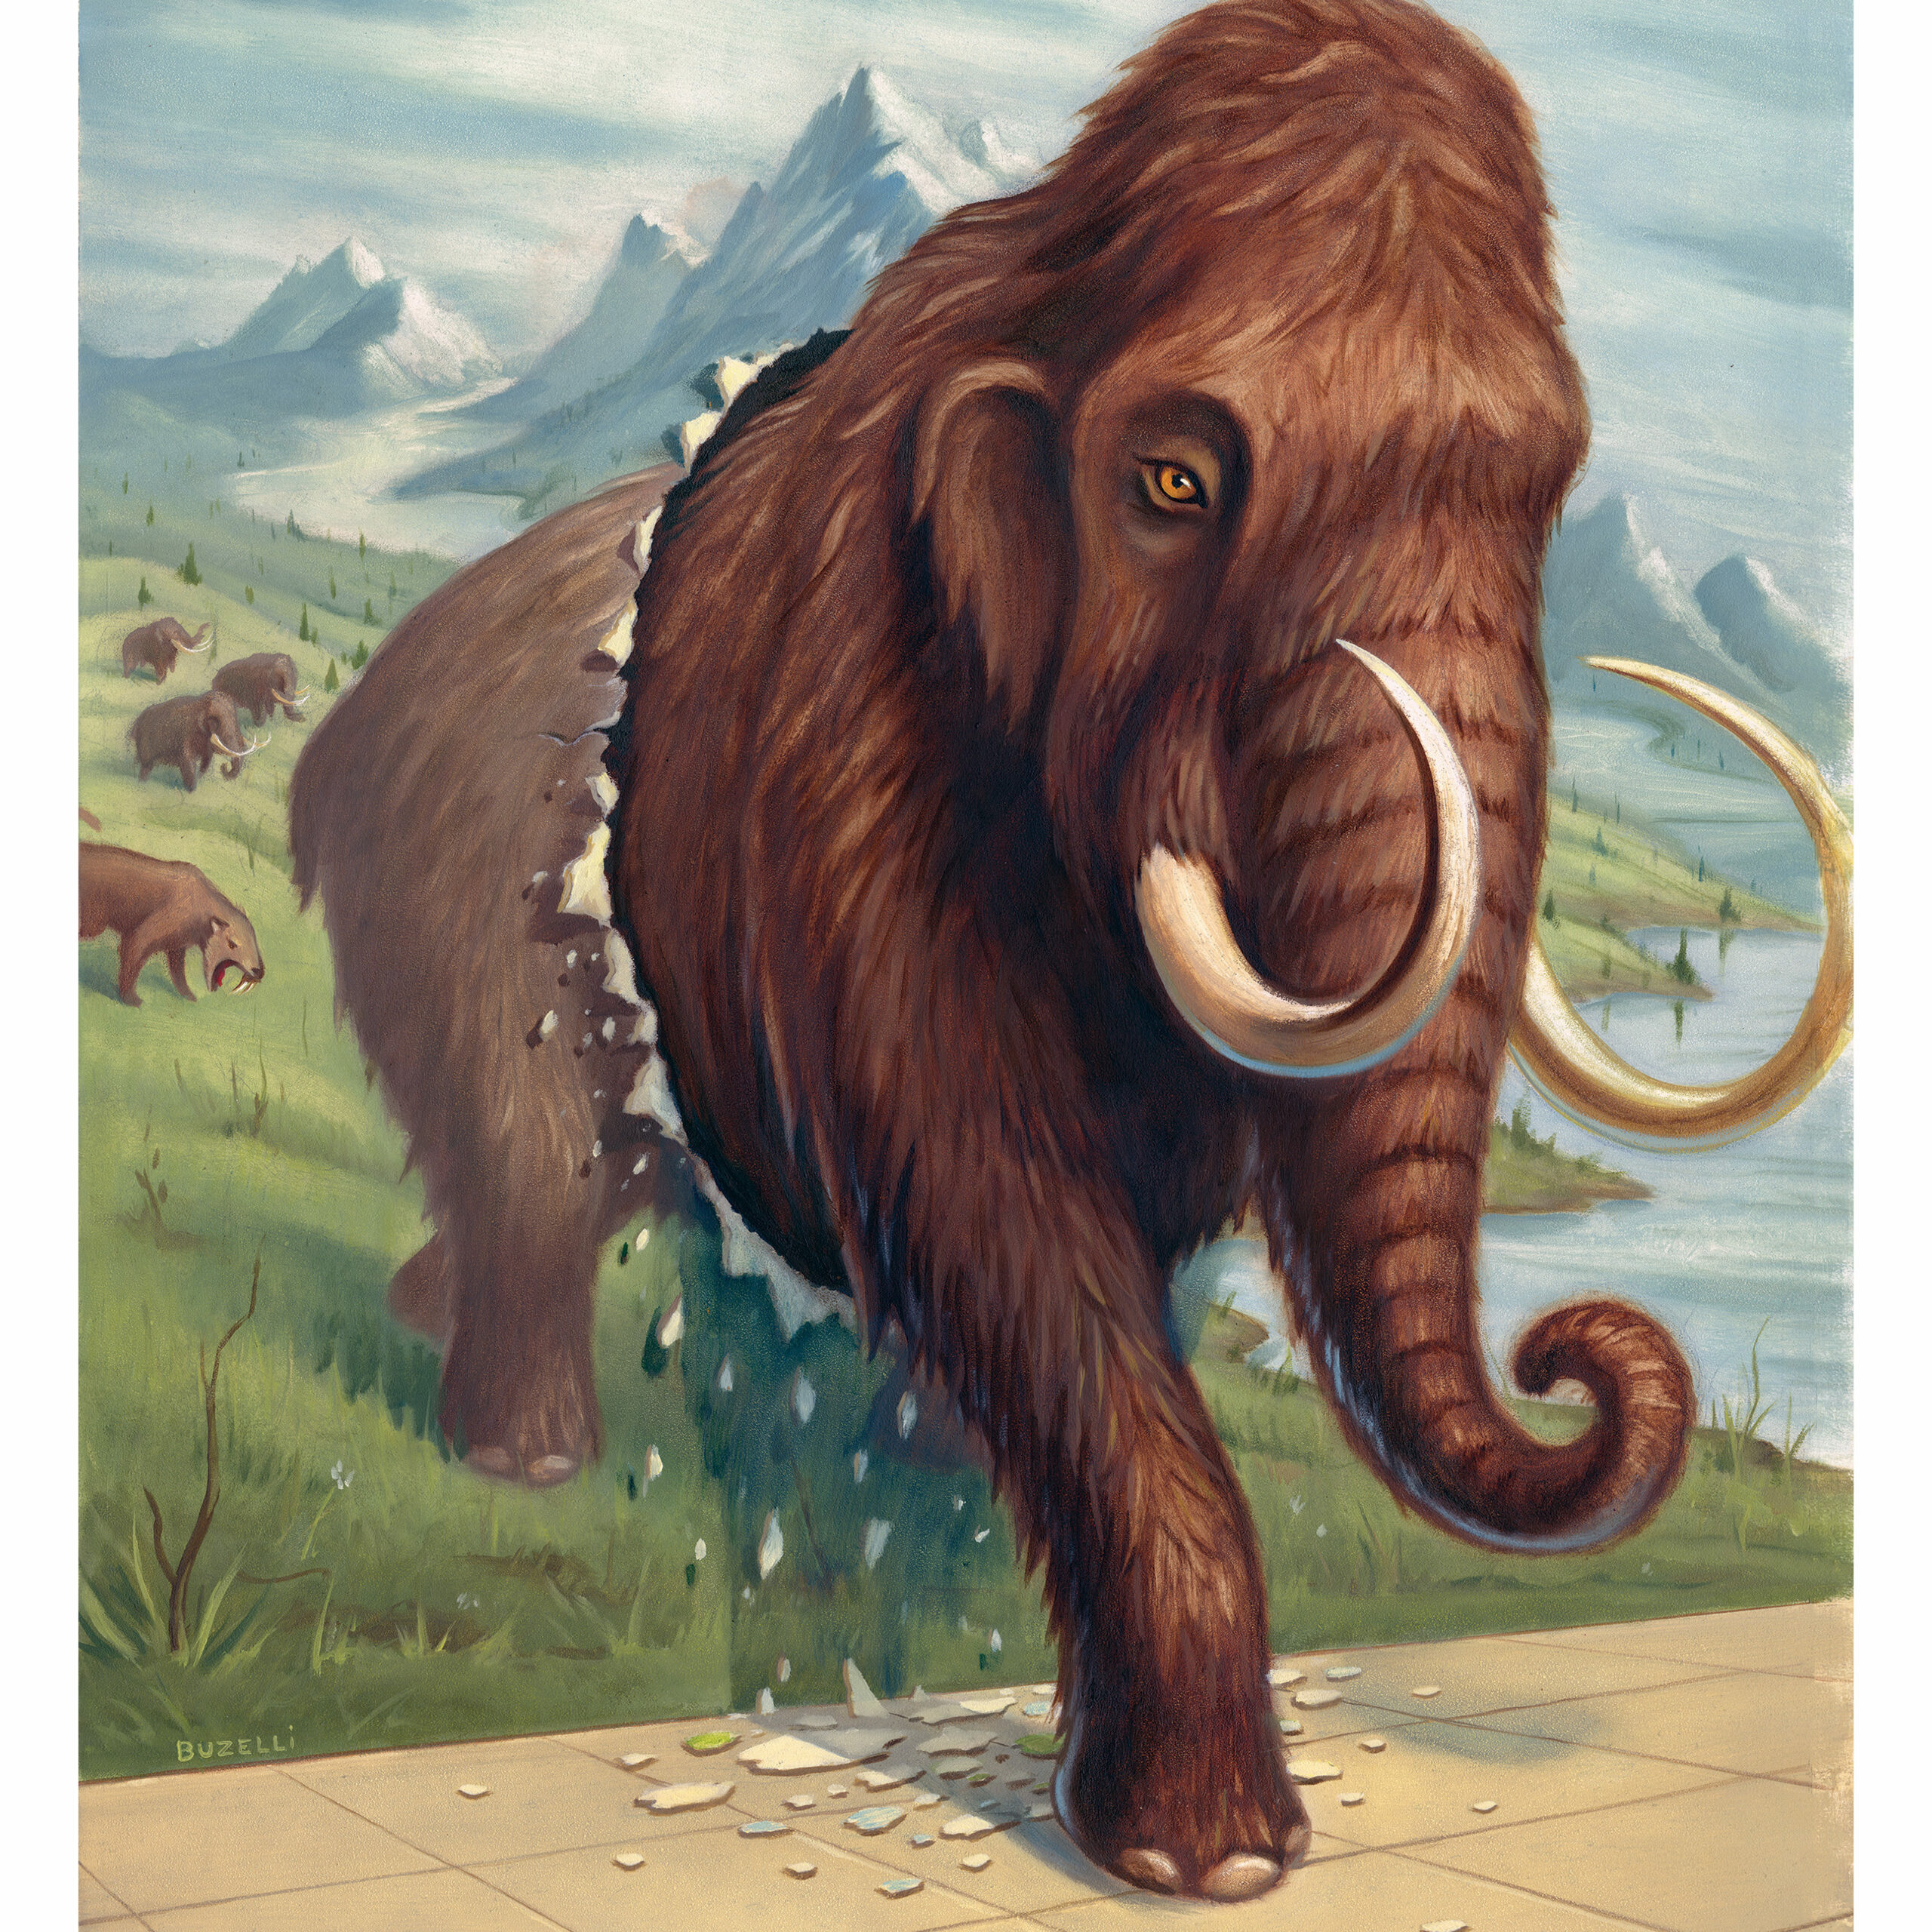 Long Live The Mammoth